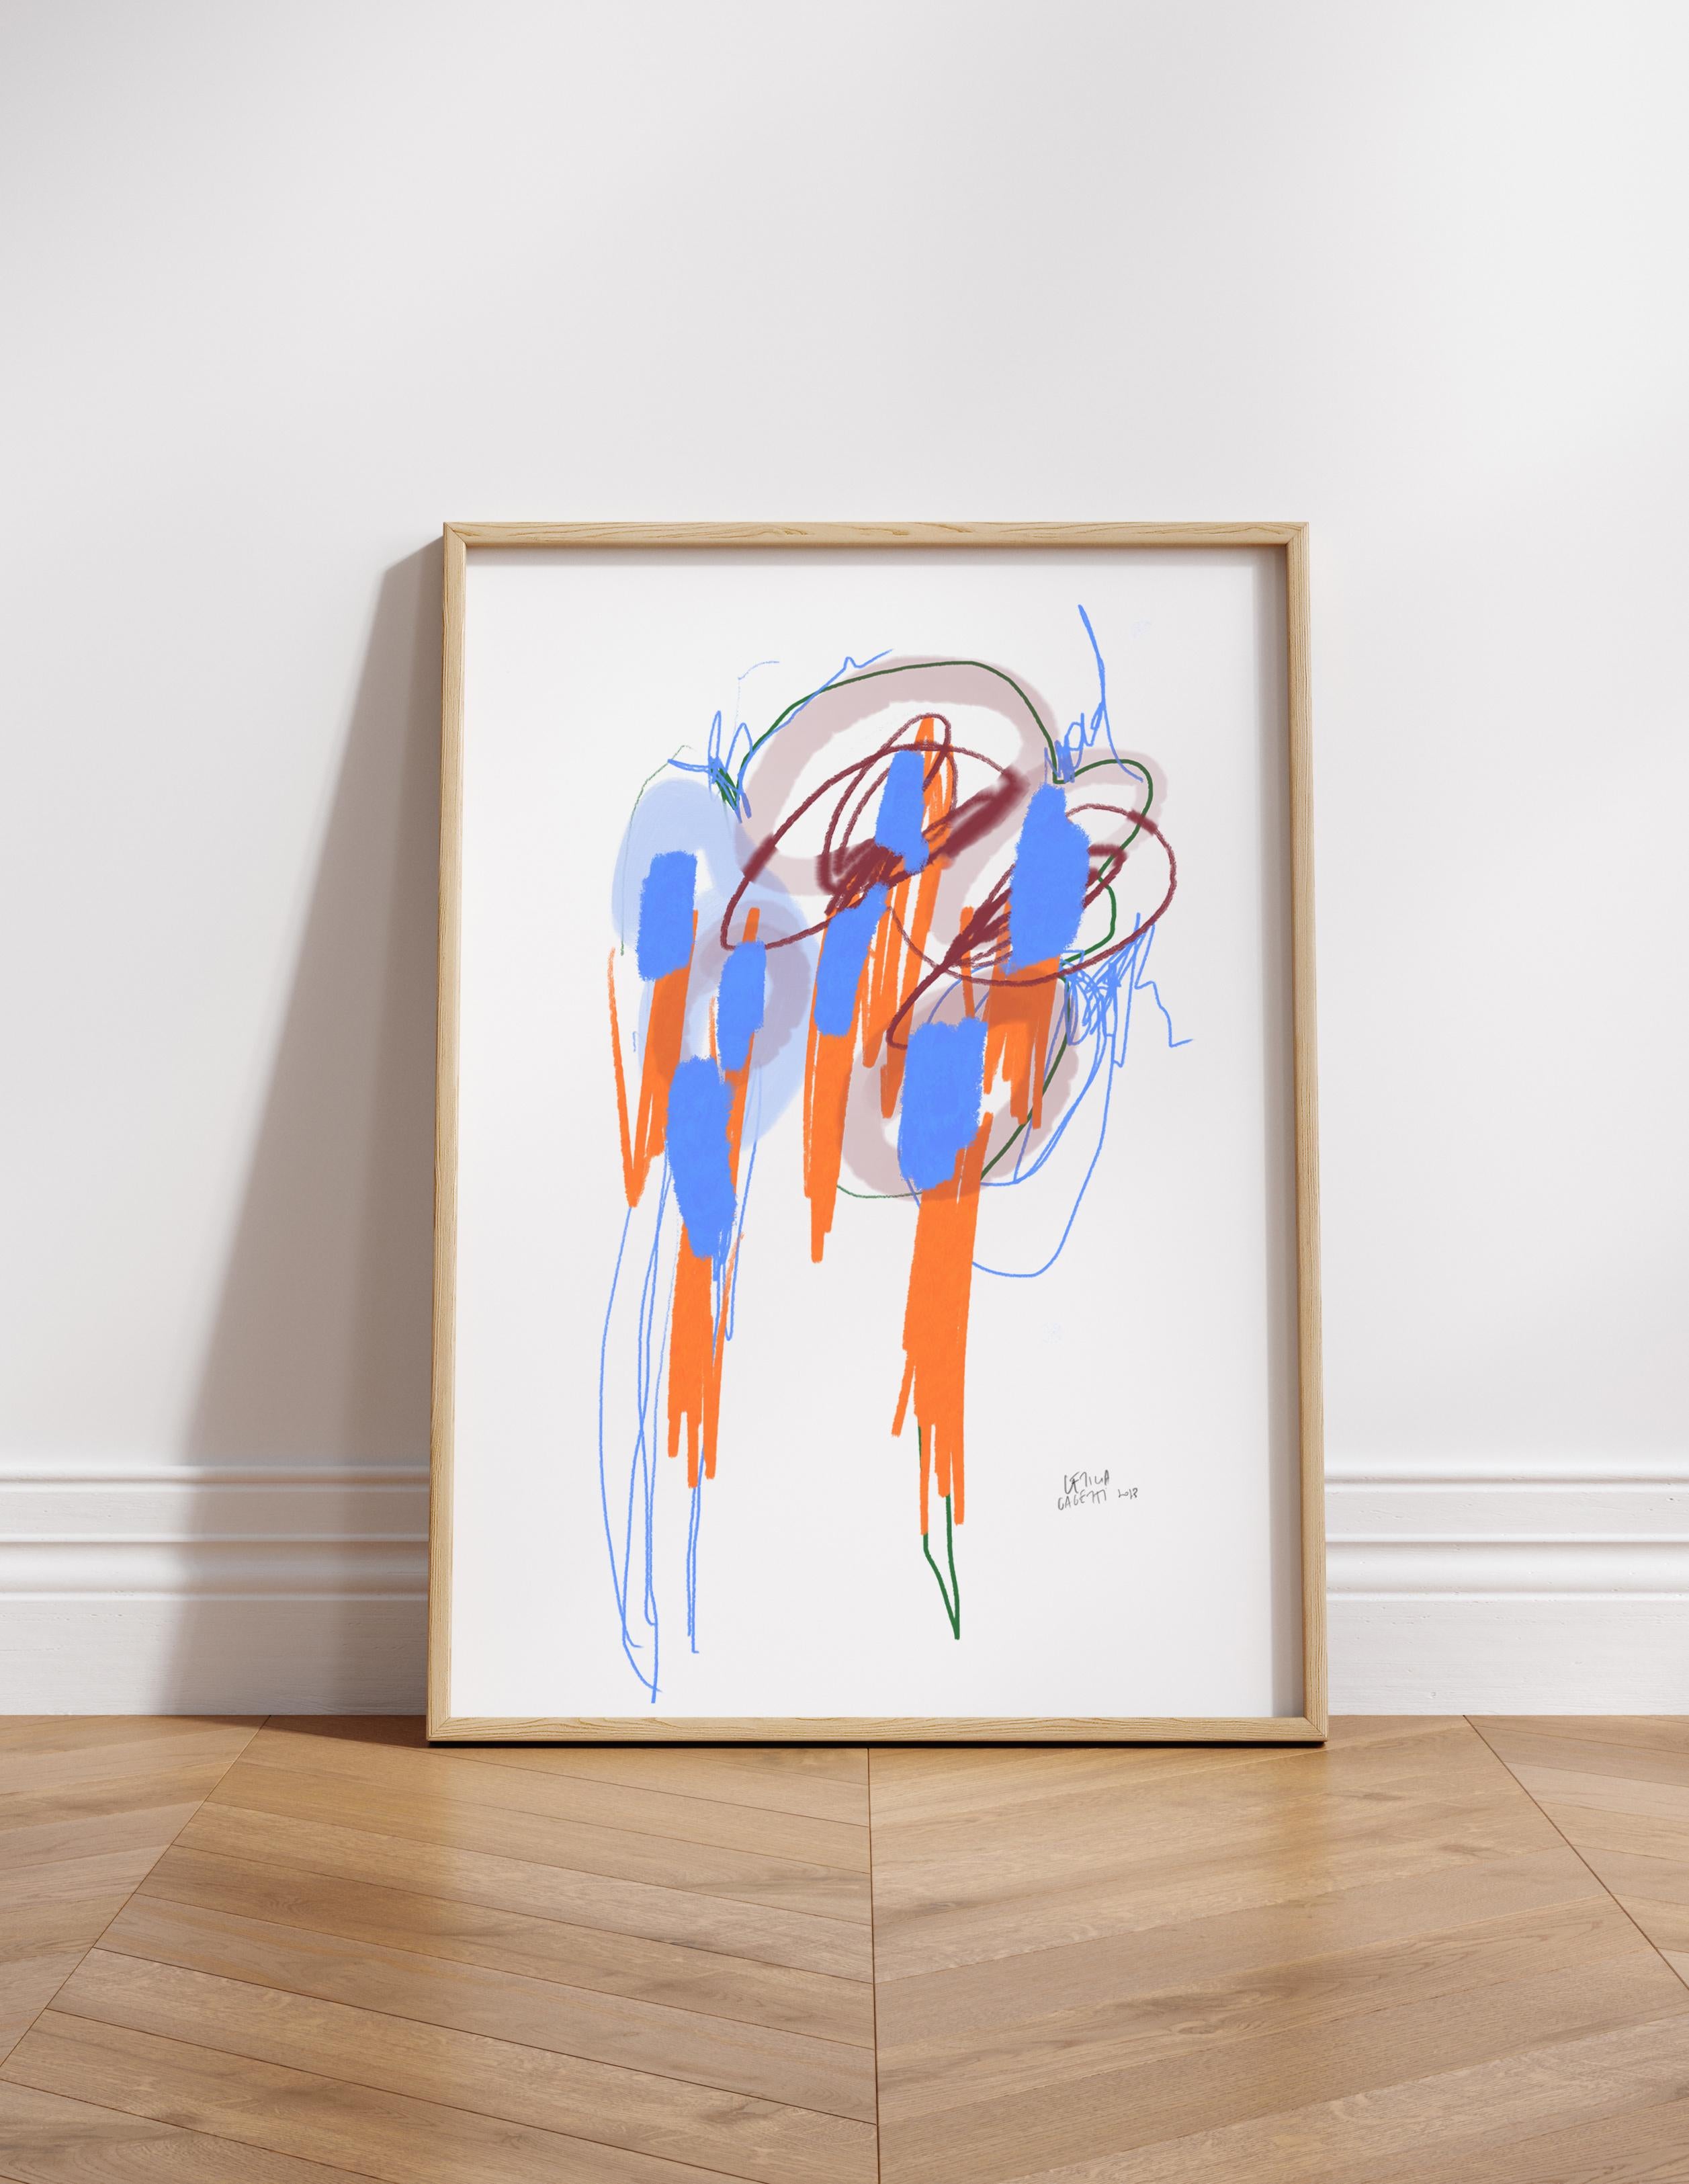 Giclée fine art print by Leticia Gagetti, printed on 260g high-quality paper with a matte finish that ensures vivid and saturated colors.

Crafted through giclée printing on museum-quality paper, this fine art print utilizes archival inks to capture